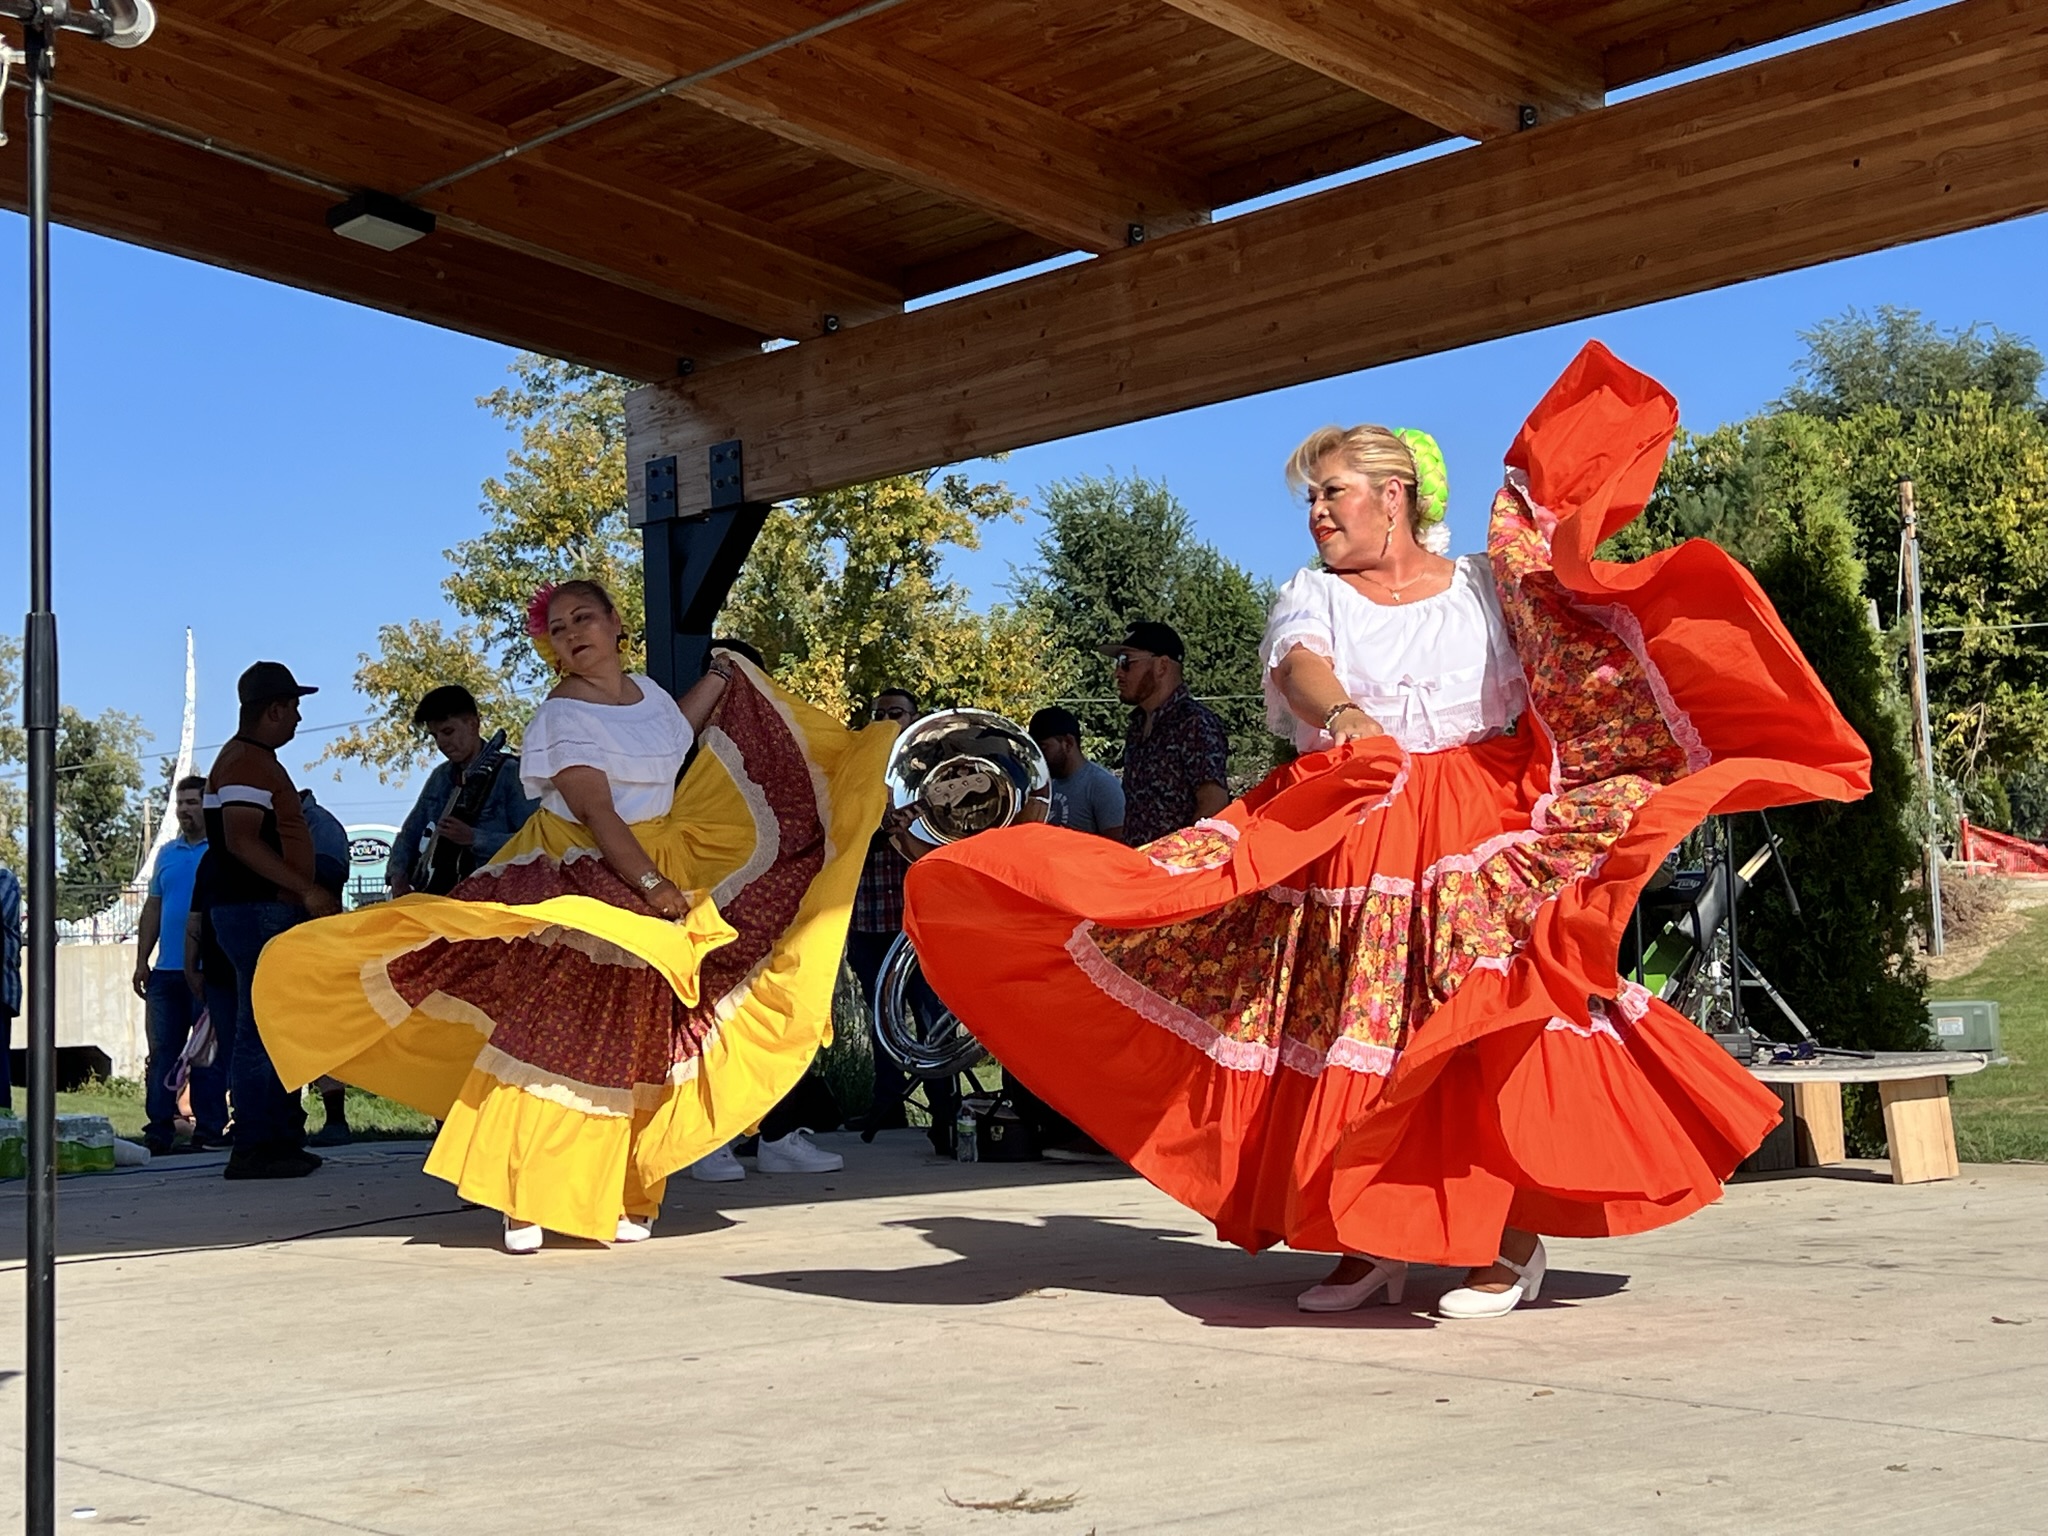 Women dancing in bright yellow and red cultural clothing at a festival in Marshalltown, Iowa